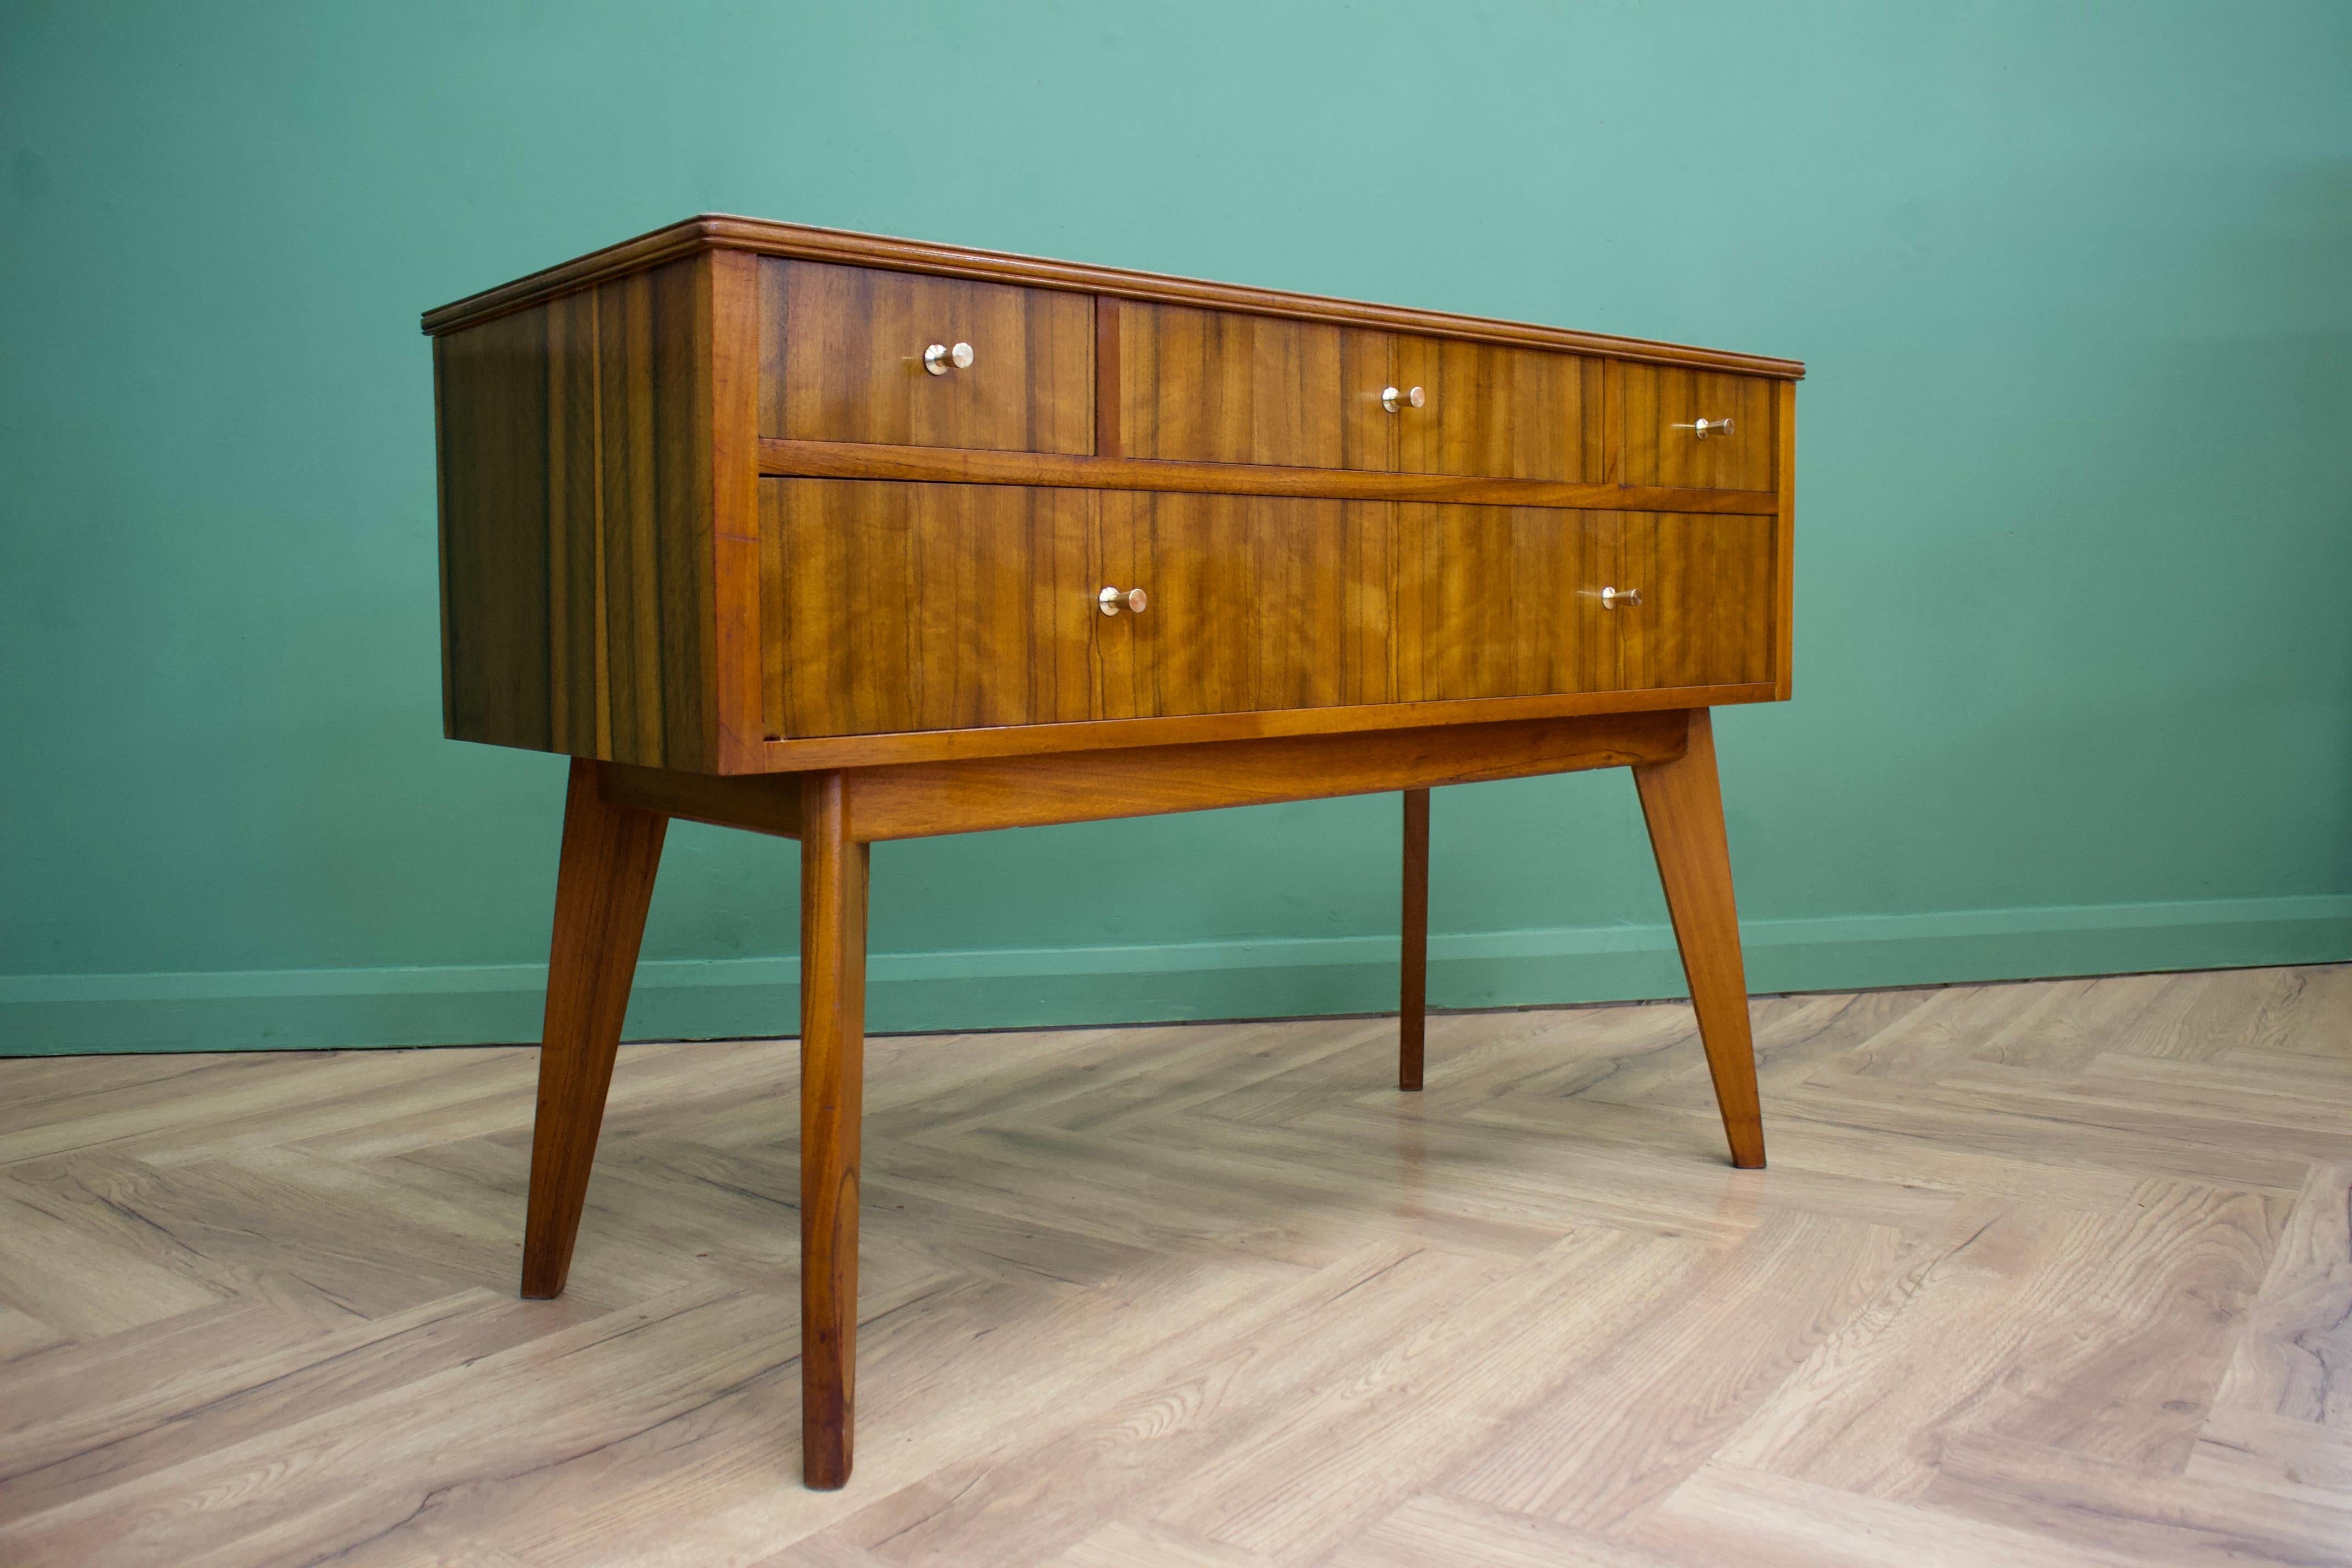 - Mid-Century Modern compact sideboard - dating from the 1950s.
- Manufactured in the UK by Morris of Glasgow 
- Features four drawers.